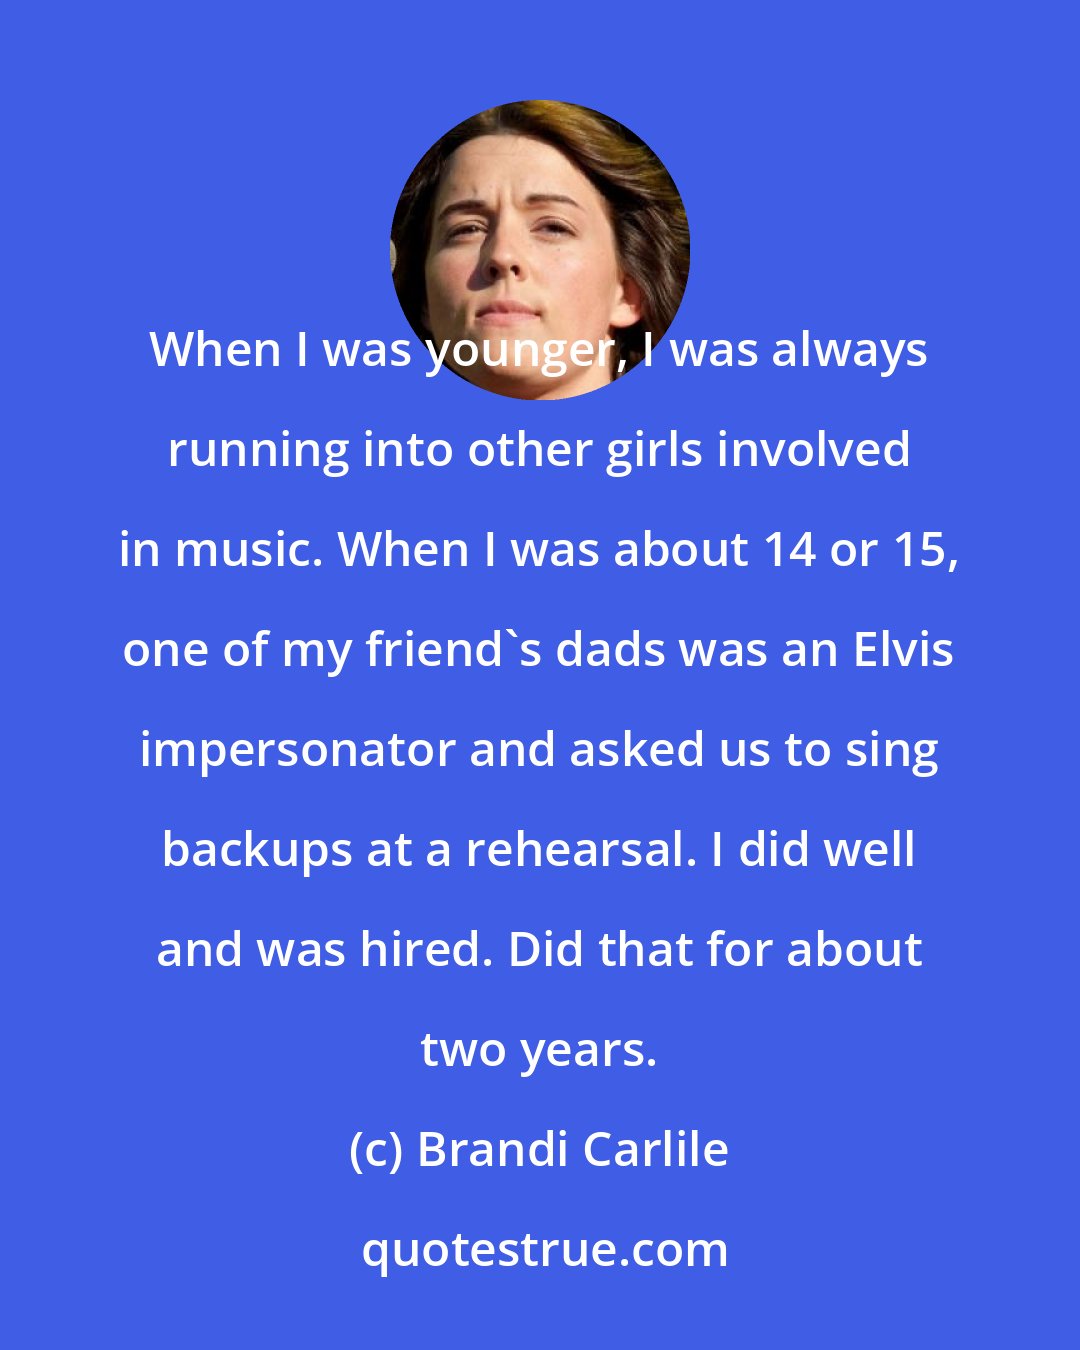 Brandi Carlile: When I was younger, I was always running into other girls involved in music. When I was about 14 or 15, one of my friend's dads was an Elvis impersonator and asked us to sing backups at a rehearsal. I did well and was hired. Did that for about two years.